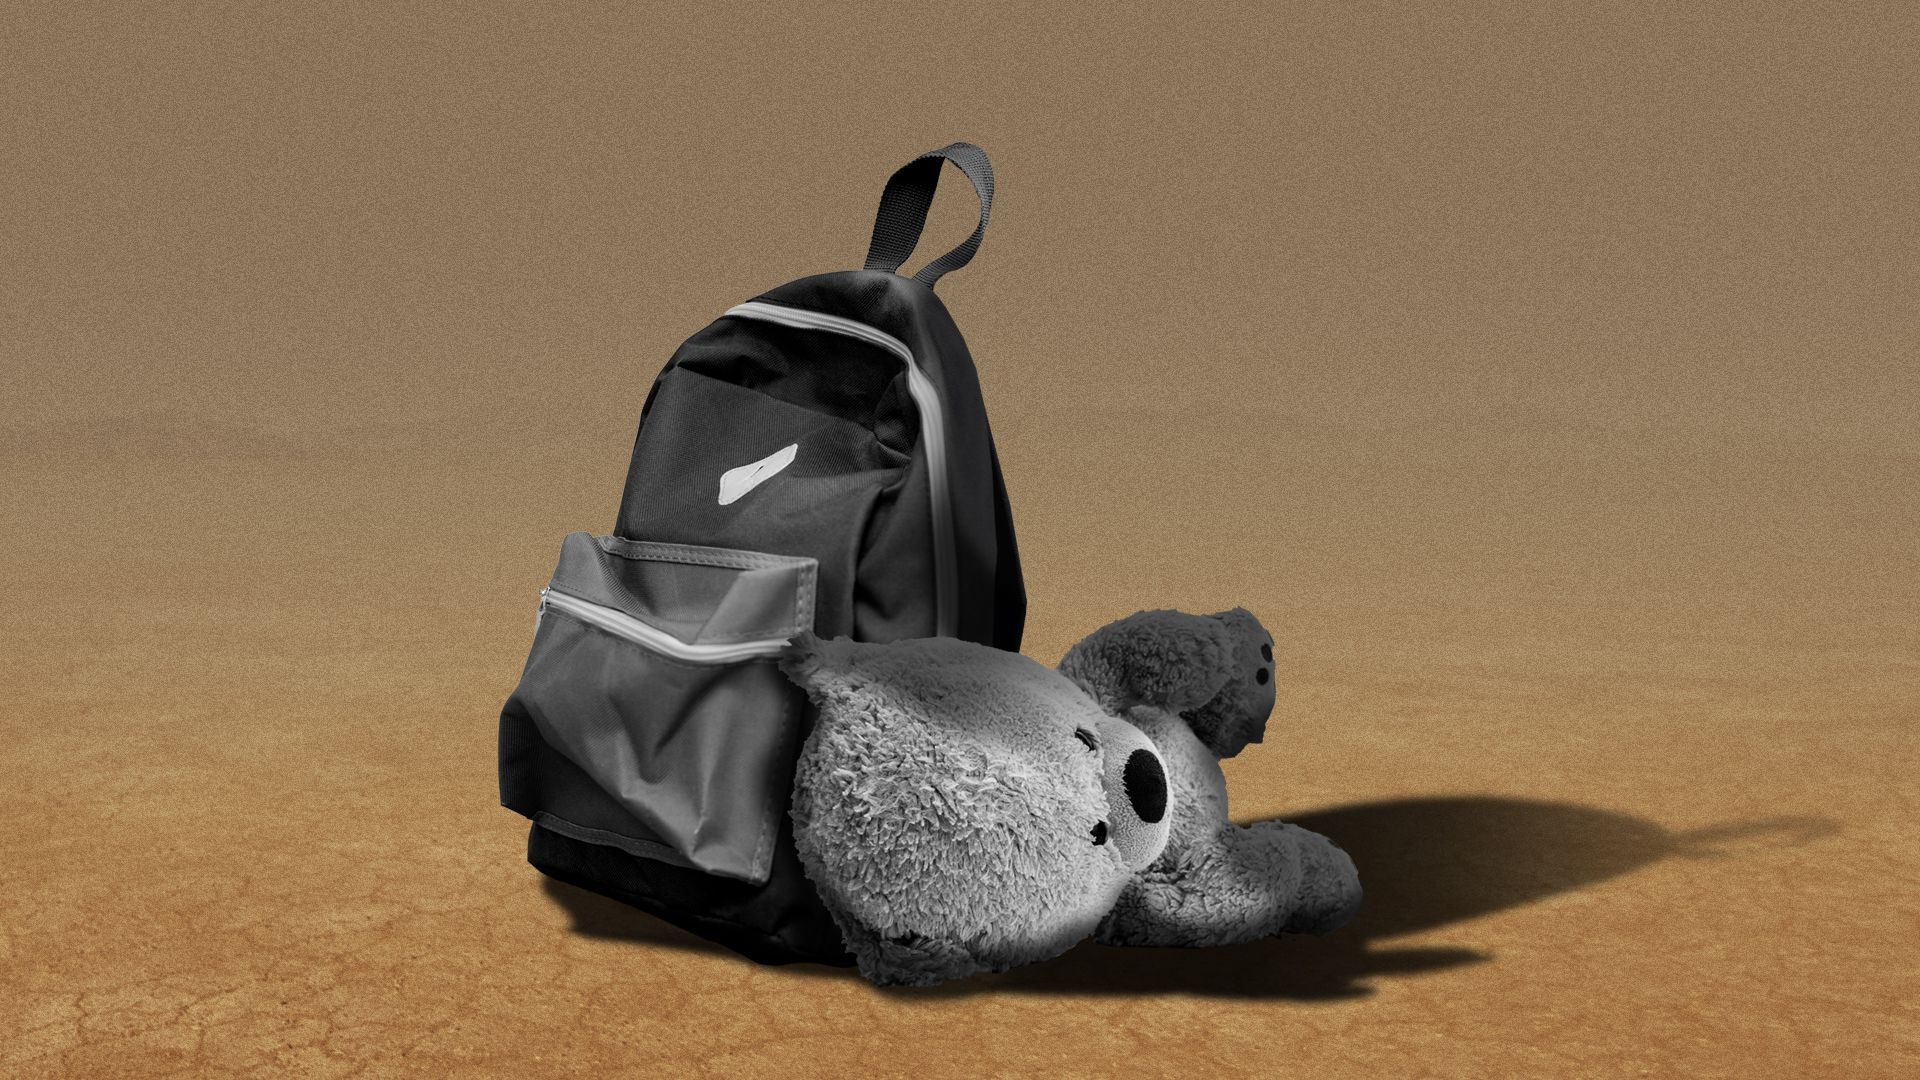 Illustration of a backpack and teddy bear alone in the desert